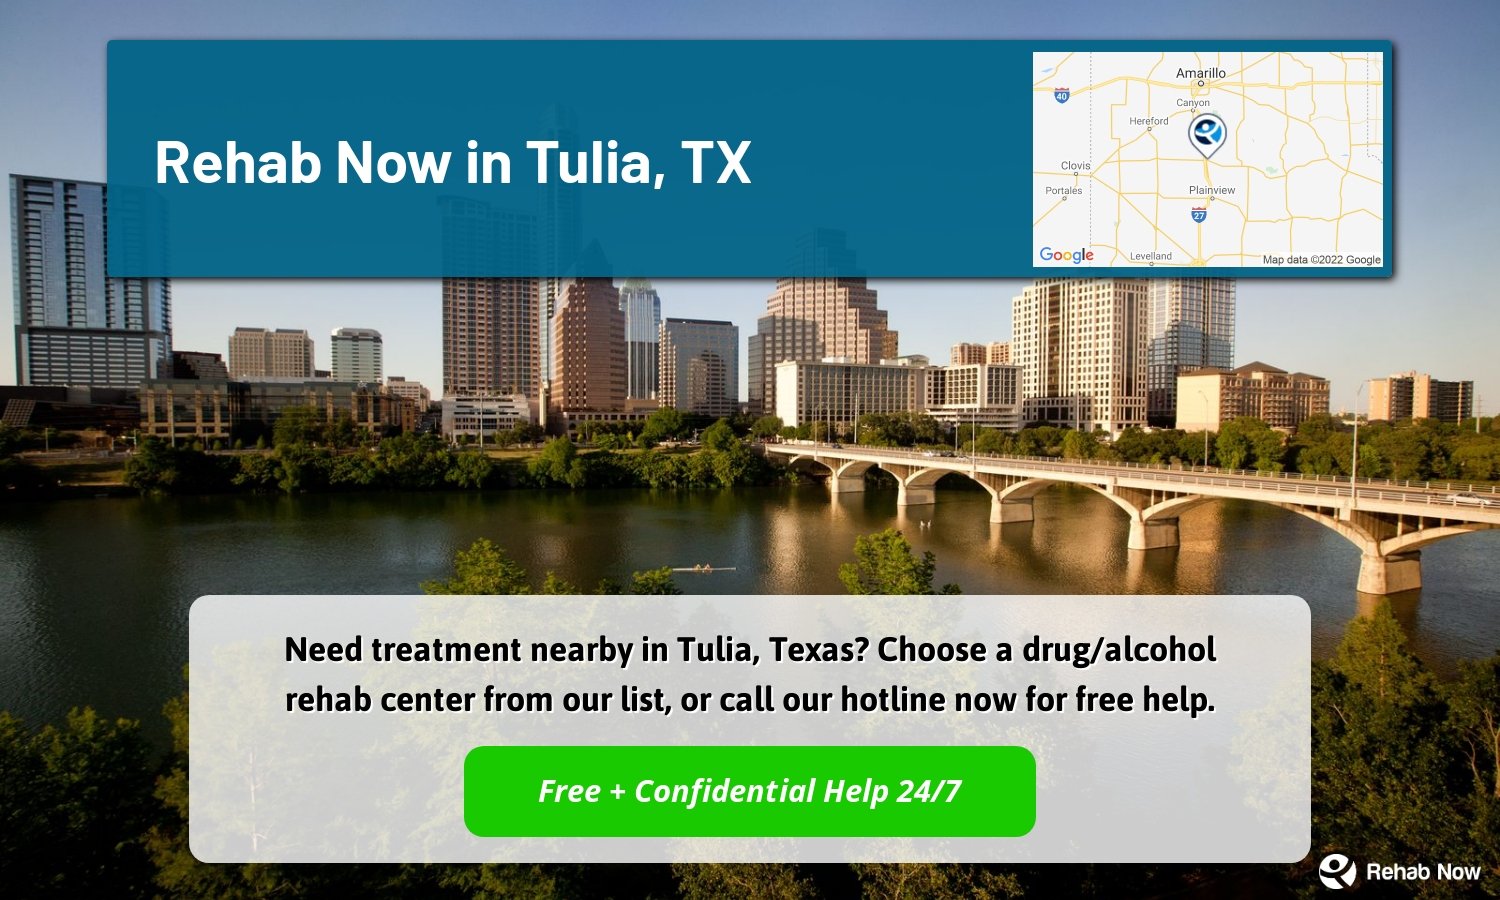 Need treatment nearby in Tulia, Texas? Choose a drug/alcohol rehab center from our list, or call our hotline now for free help.